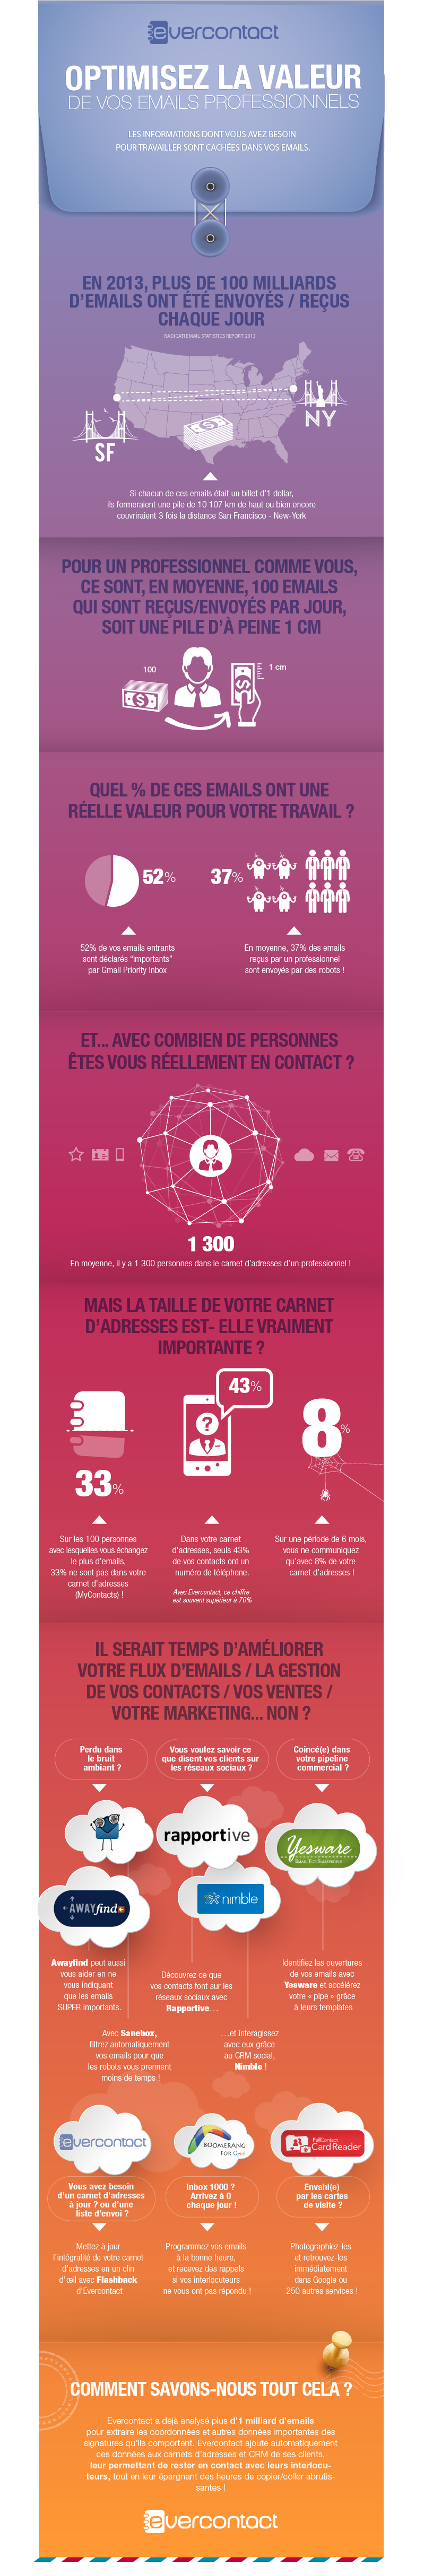 Infographie2-evercontact